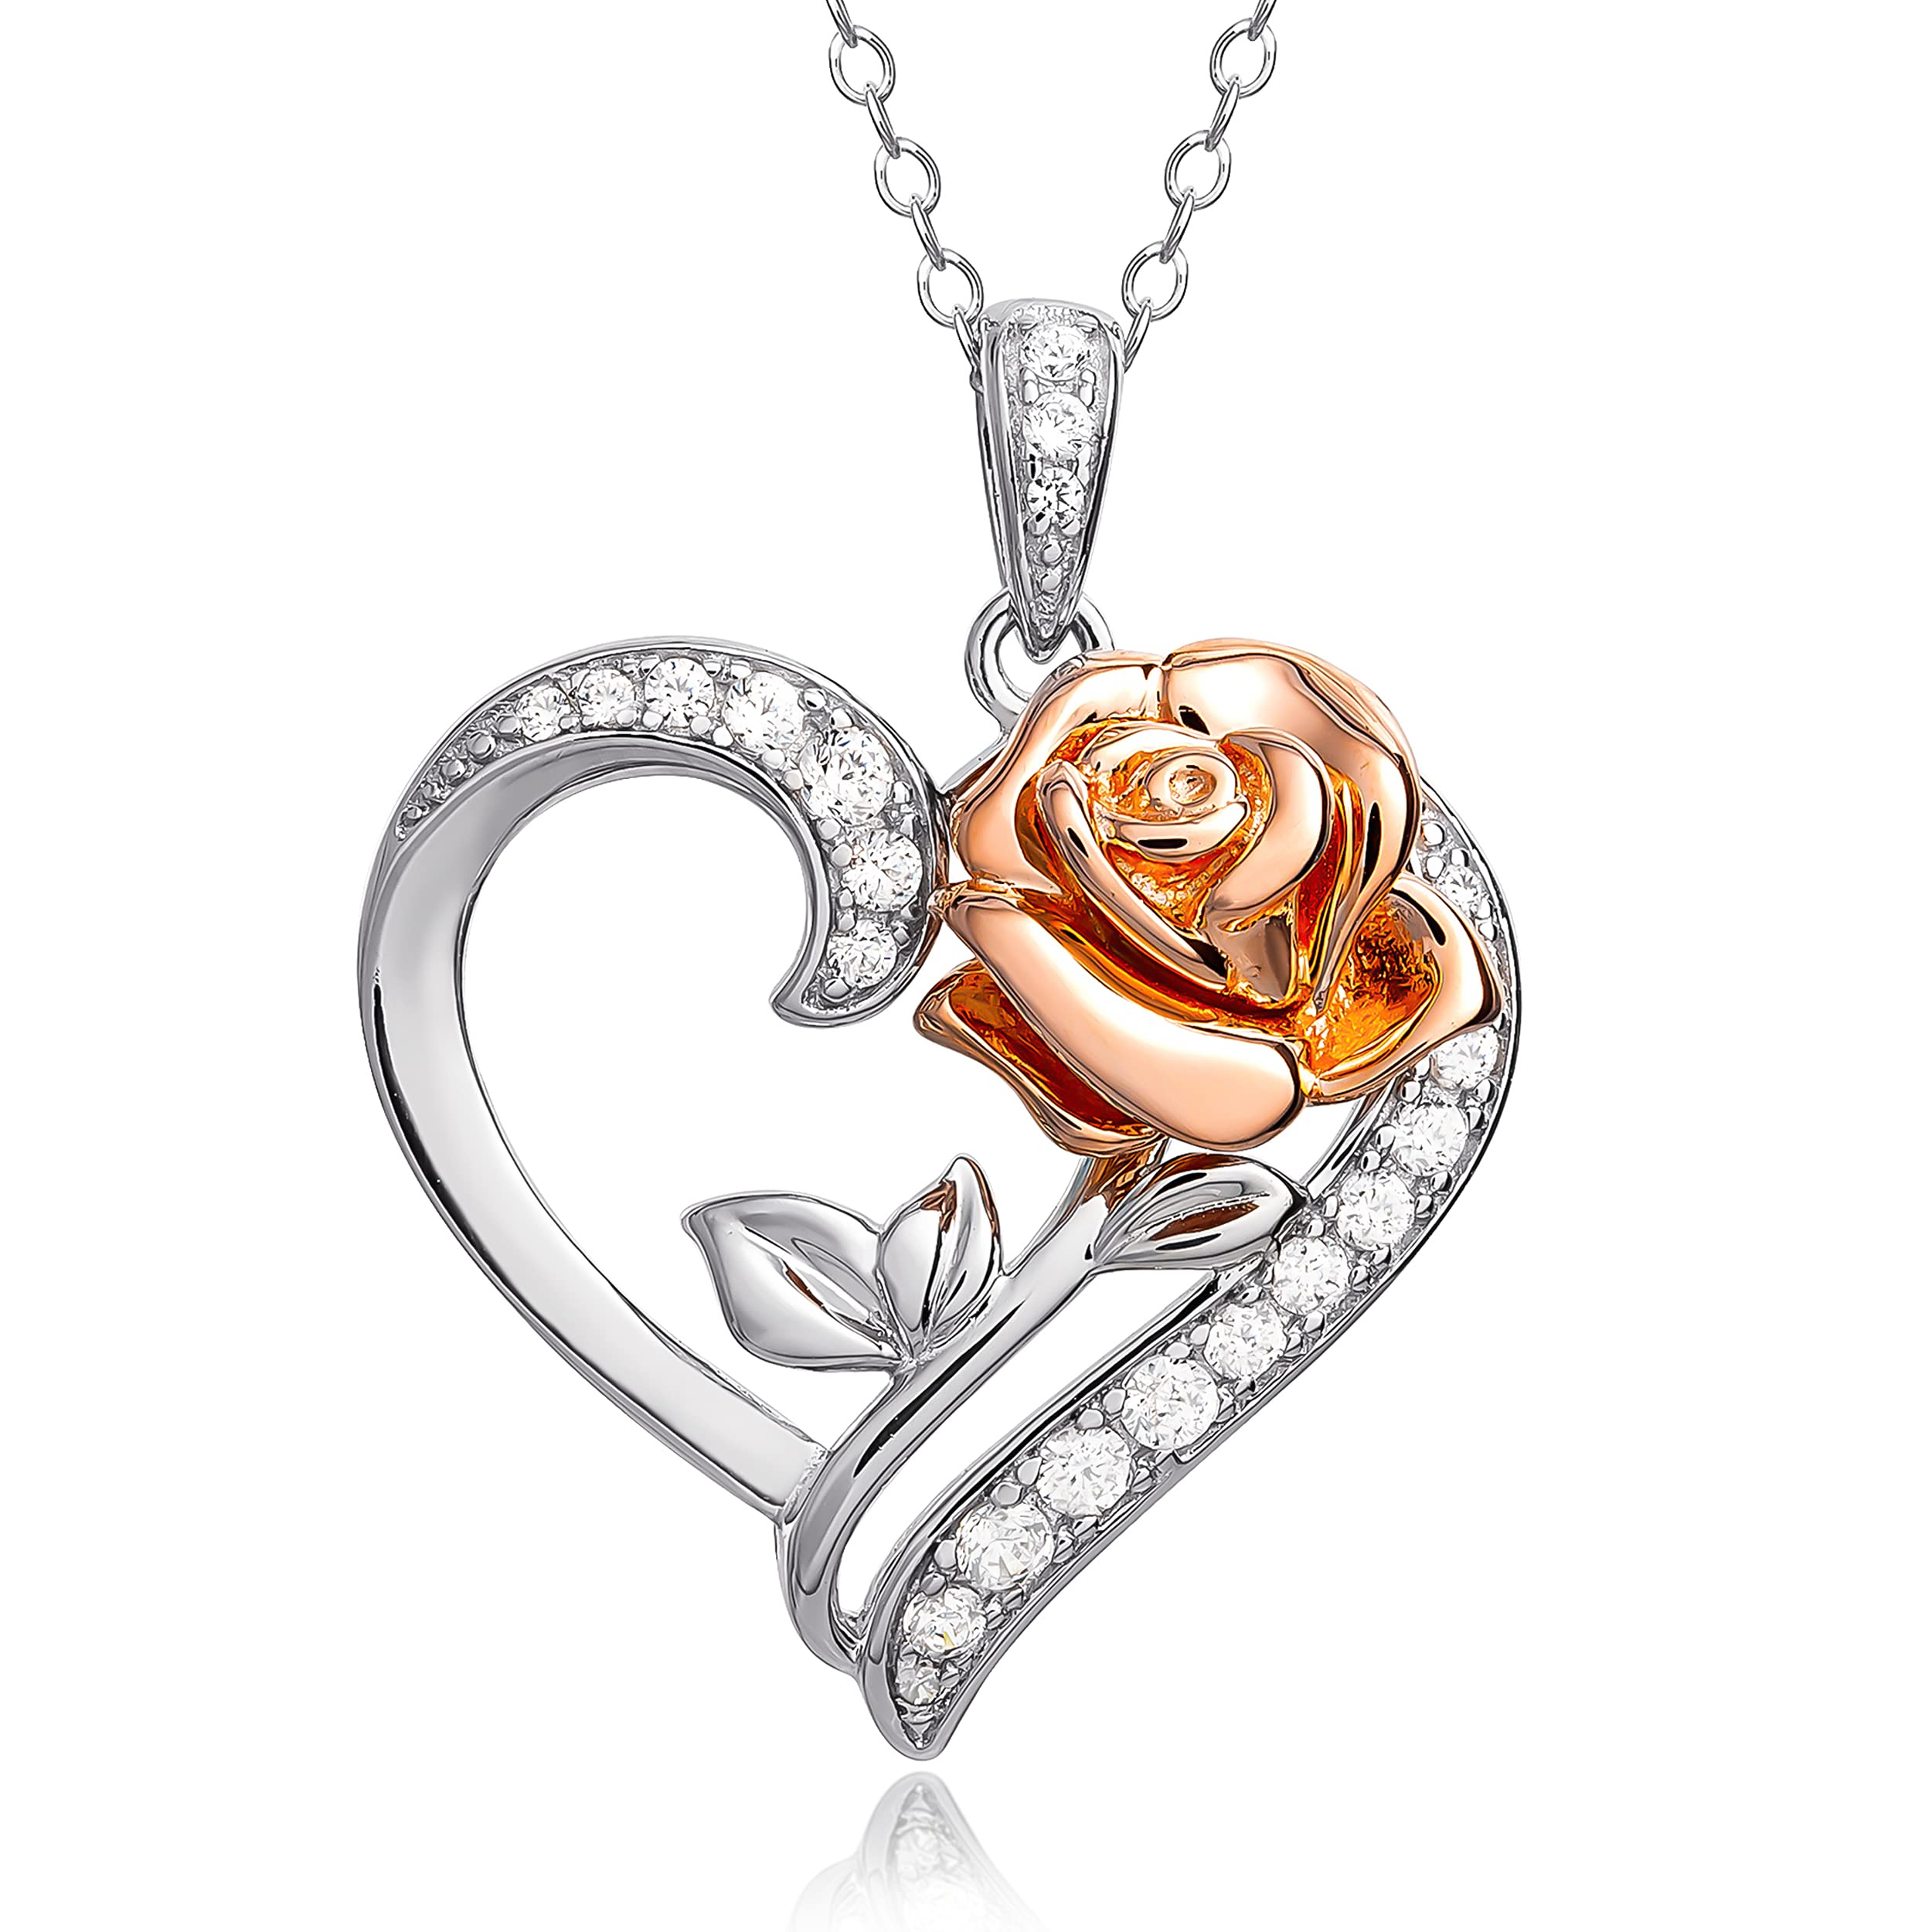 Disney Jewelry for Women - Beauty and the Beast Two Tone Rose and Heart Sterling Silver Pendant Necklace, Pink Gold Plate, Cubic Zirconia Accents, 18